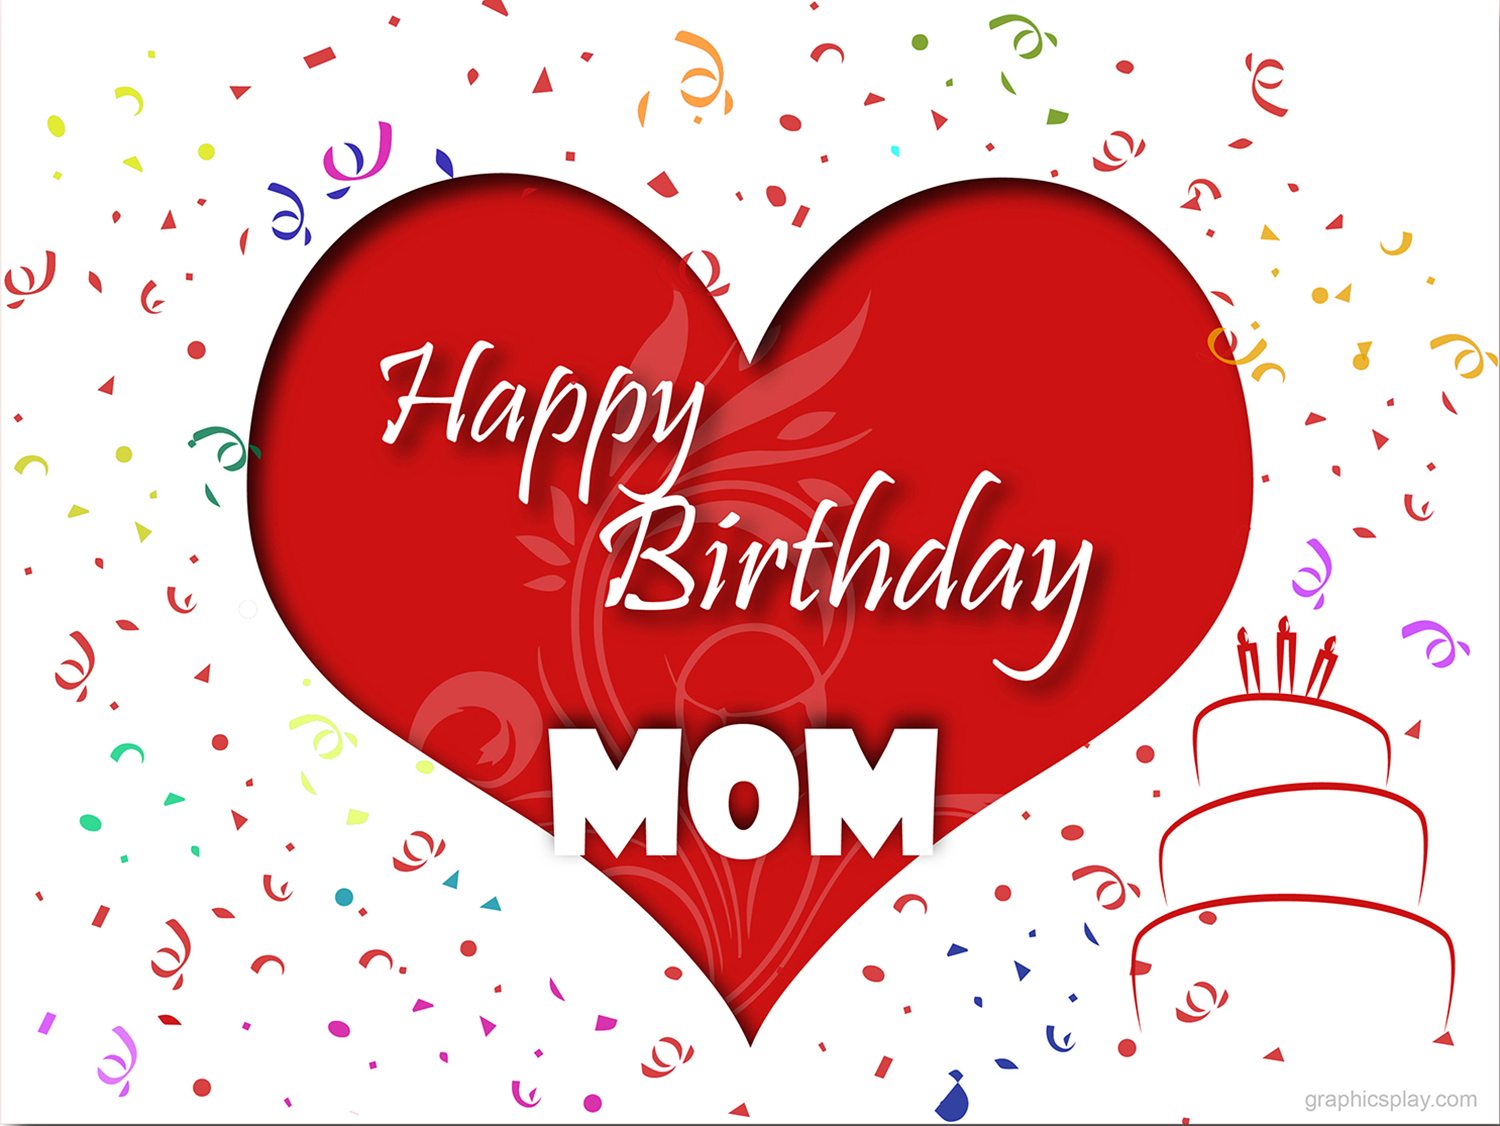 Happy Birthday Mom Greeting With Love GraphicsPlay